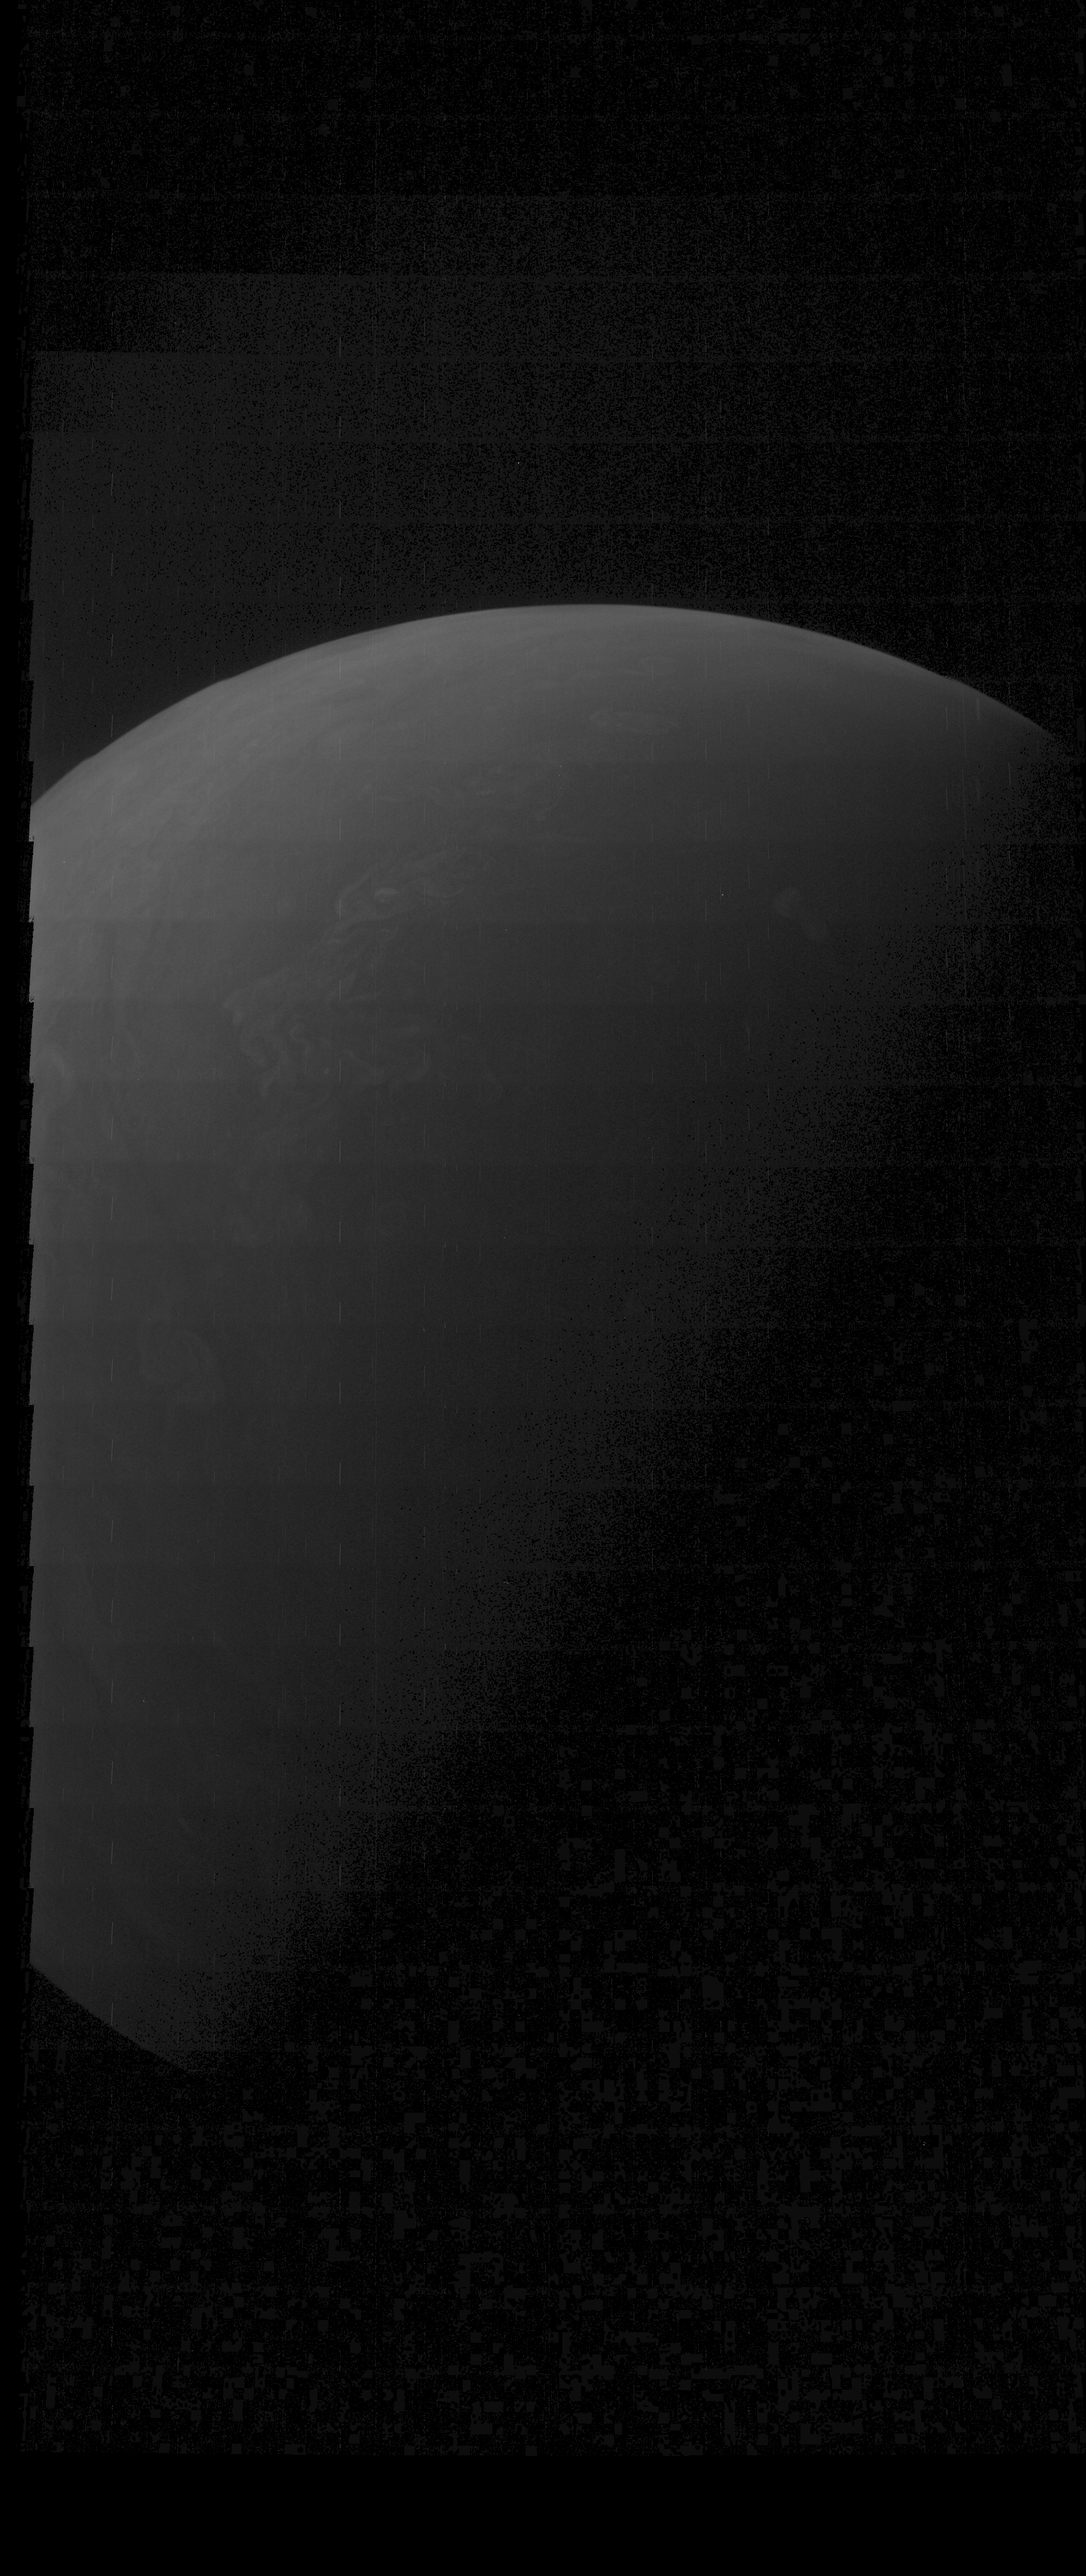 JNCE_2020101_26M00017_V01-raw_proc_hollow_sphere_m_pj_out.BMP_thumbnail_.png